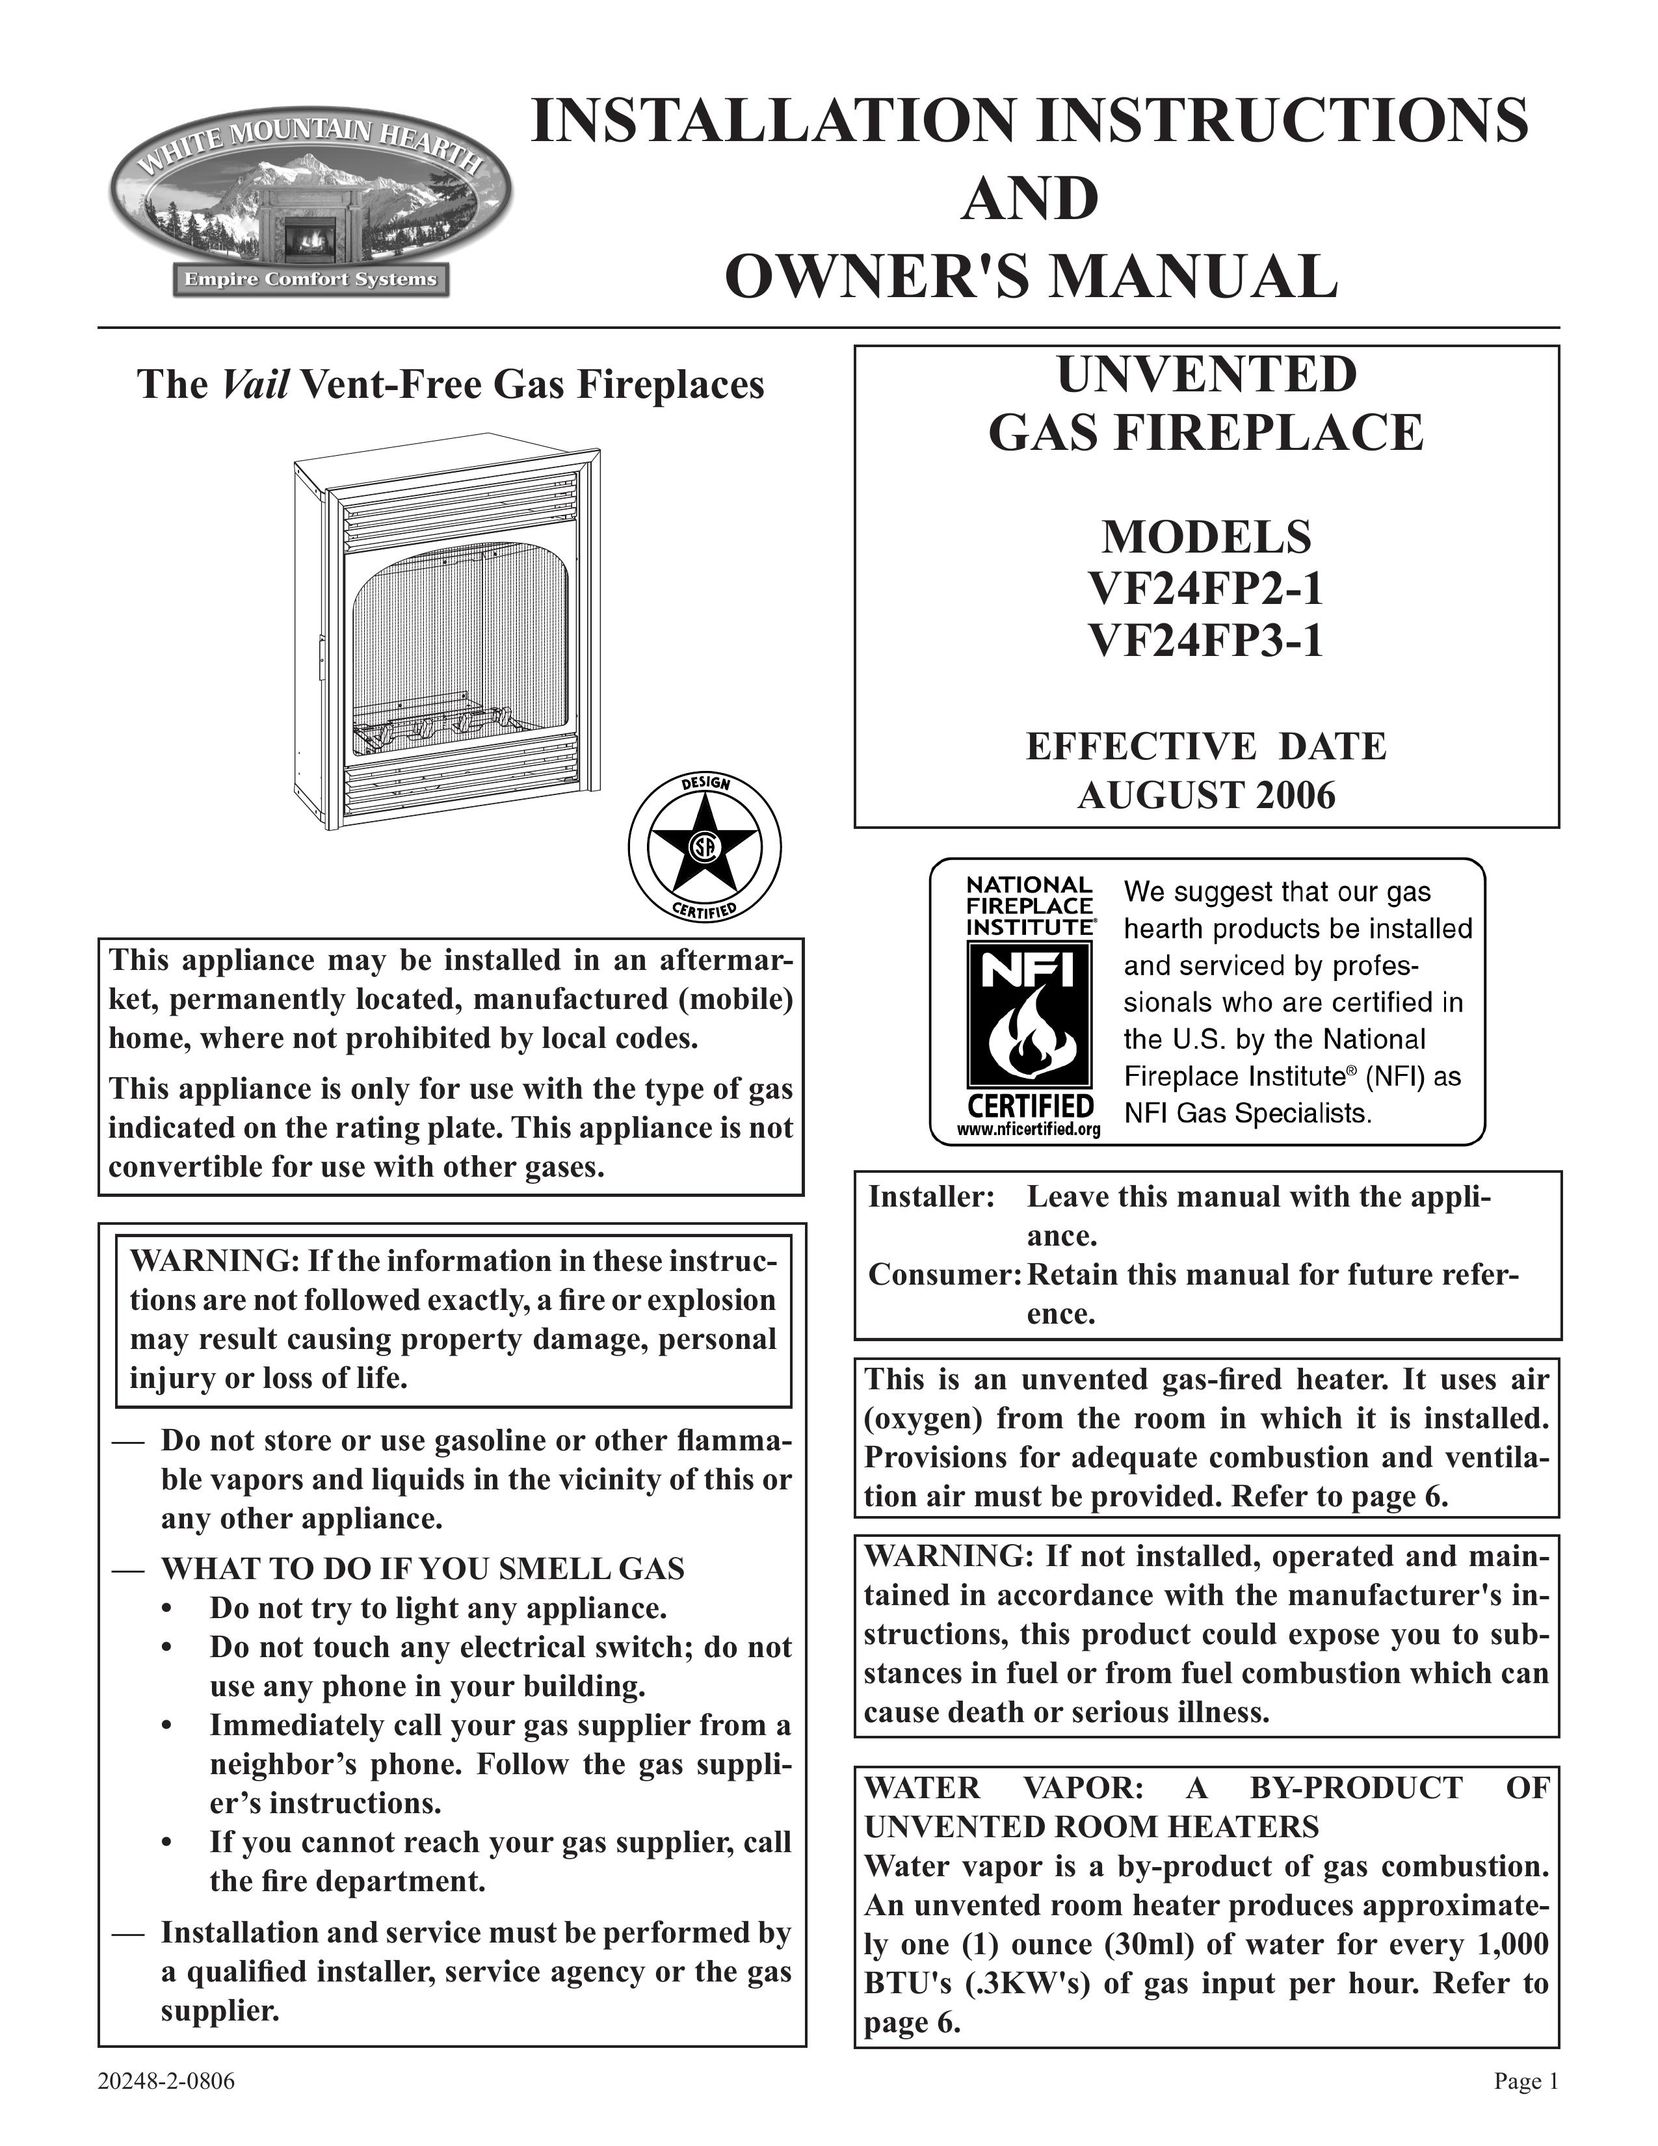 Empire Comfort Systems VF24FP2-1 Indoor Fireplace User Manual